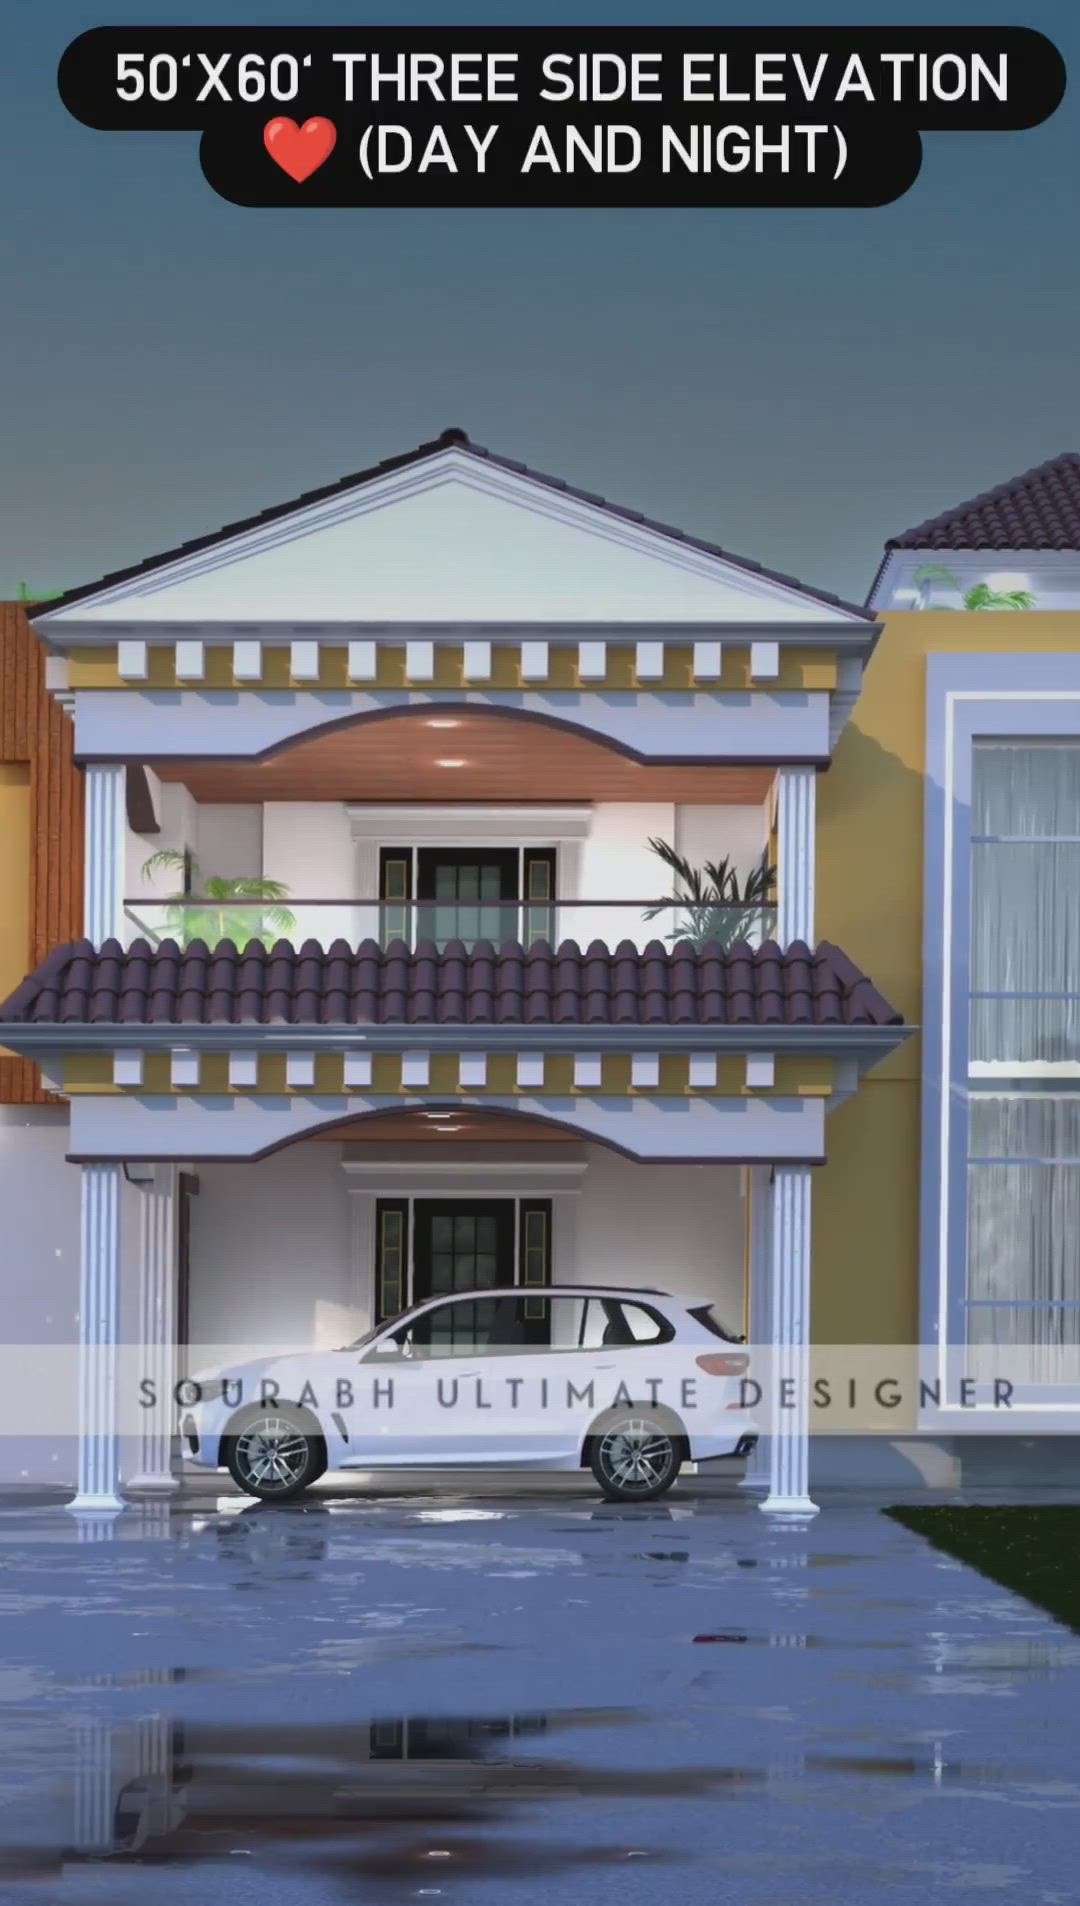 🔸 Follow @sourabh_ultimate_designer for more! 🤩

Give us chance to design for you. We work with Architects, Civil Engineers, Contractors and Individuals. 🤝⁣
⁣⁣
We are offering the following services - ⁣⁣
▪ Front Elevations⁣⁣
▪ Elevation Designing⁣⁣
▪ 3d Bungalow Day & Night Views⁣⁣ 🙂
▪ Interior Designs⁣⁣
▪ 2D planing 
▪ walk-through 
▪ Bird eye view 🐦
⁣⁣
For More Information,⁣⁣
📲 Call Or WhatsApp Now: +91 8085490212
📨 Drop an Email : bs.sourabh93@gmail.com
⁣⁣
Follow Personal Instagram: @only.100rabh

#2d_planLelevation #homes #modernhomedesign